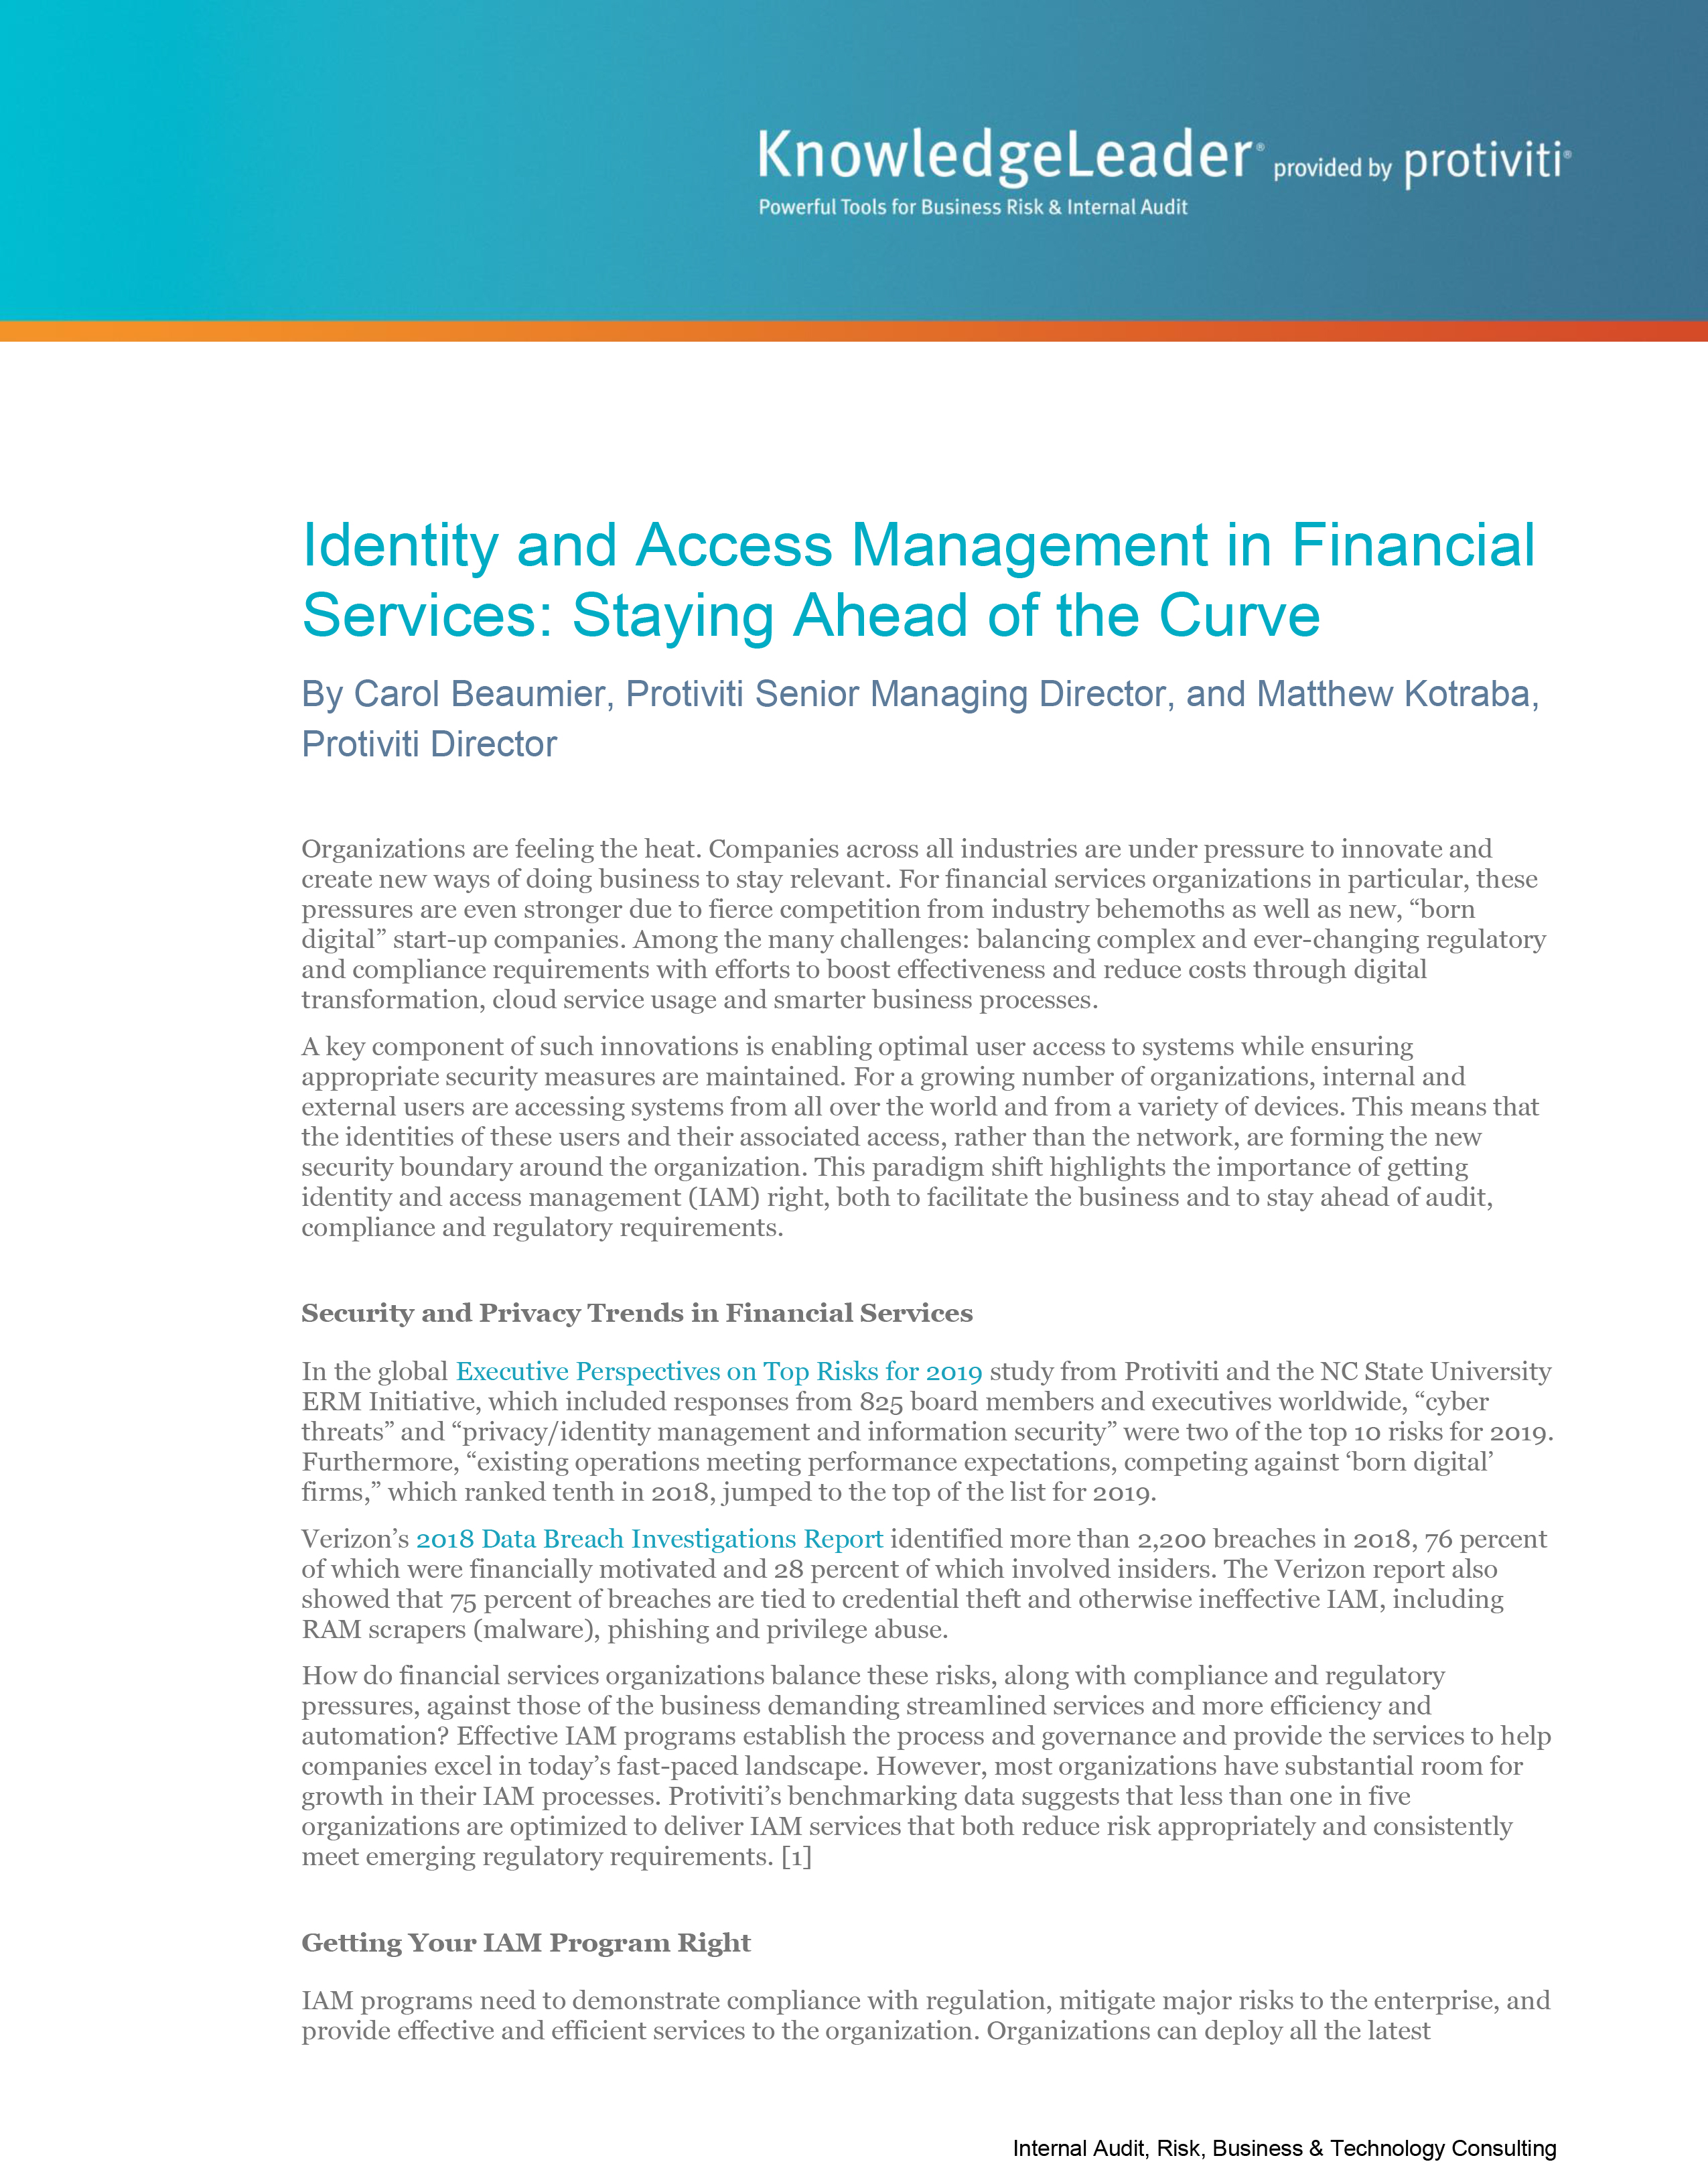 Screenshot of the first page of Identity and Access Management in Financial Services – Staying Ahead of the Curve